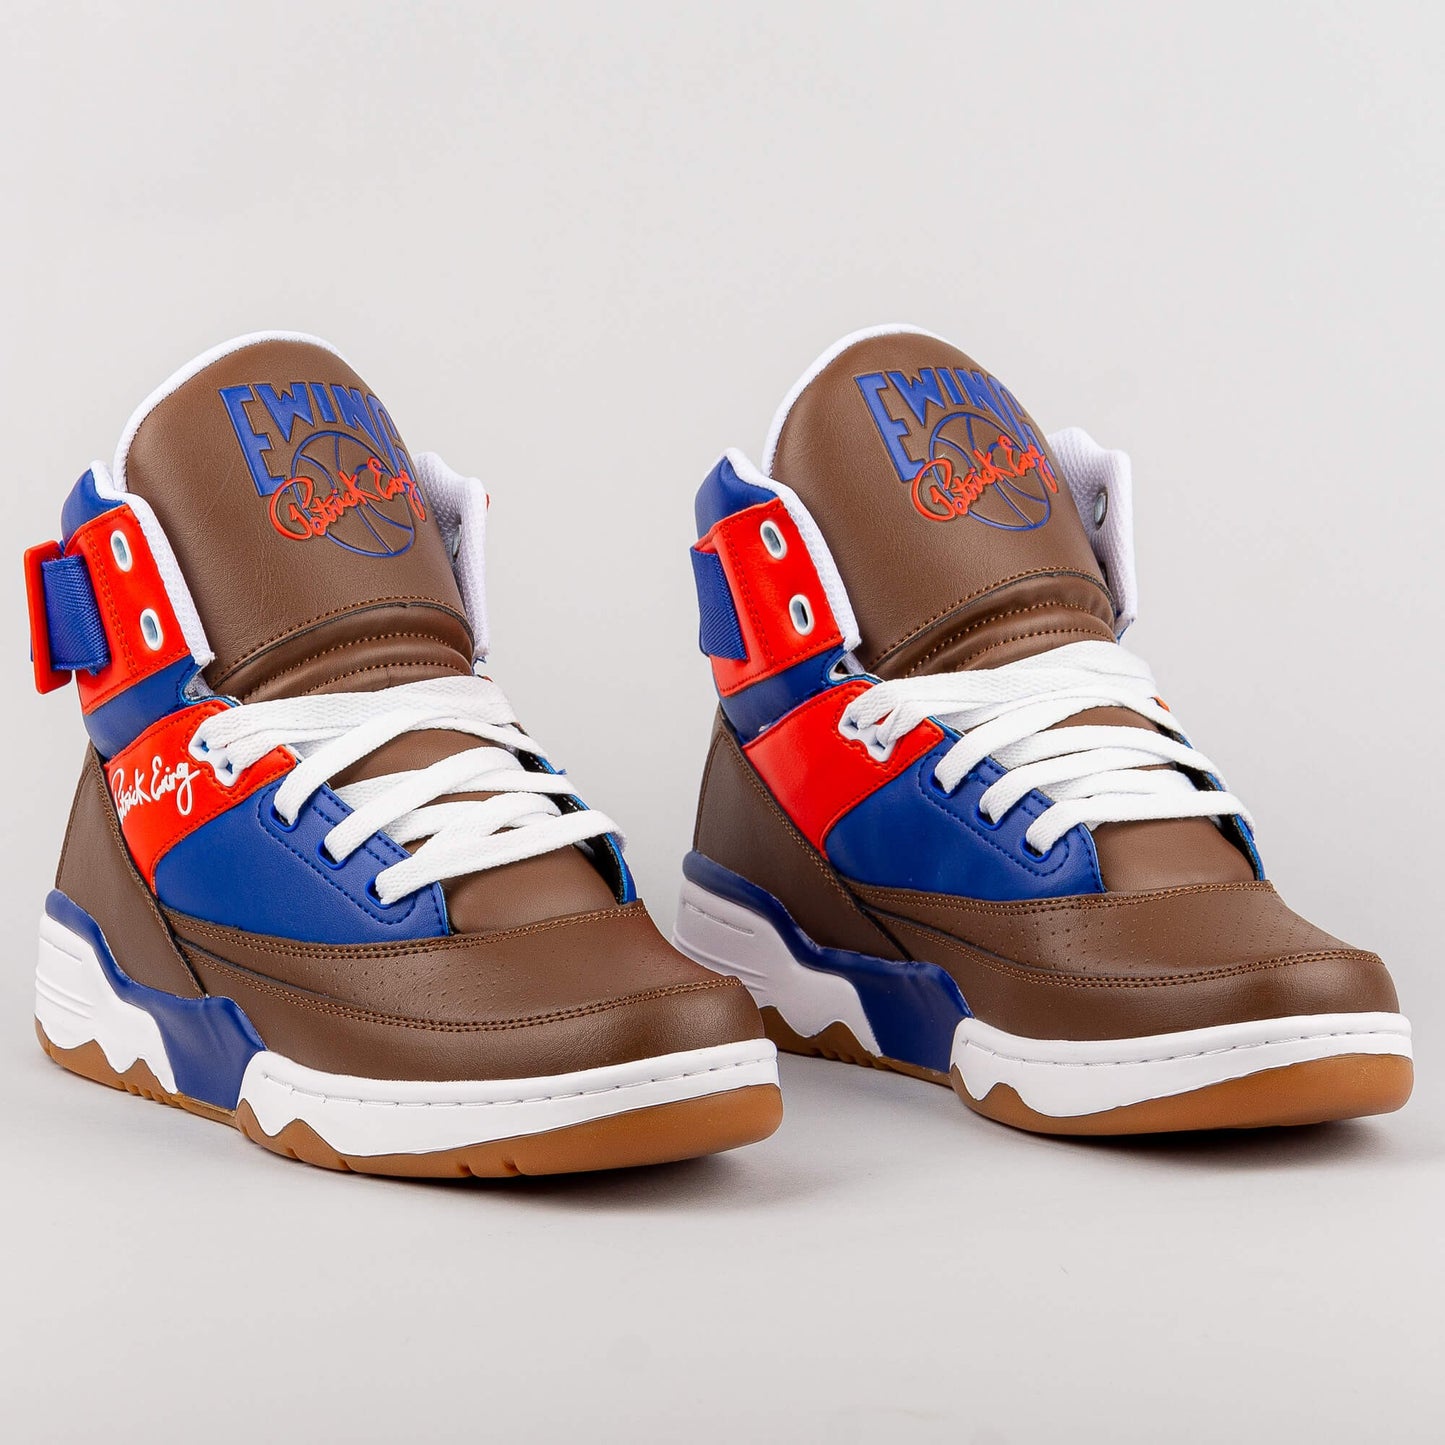 Ewing Athletics 33 HI WINTER x Snickers white/brown/royal/red